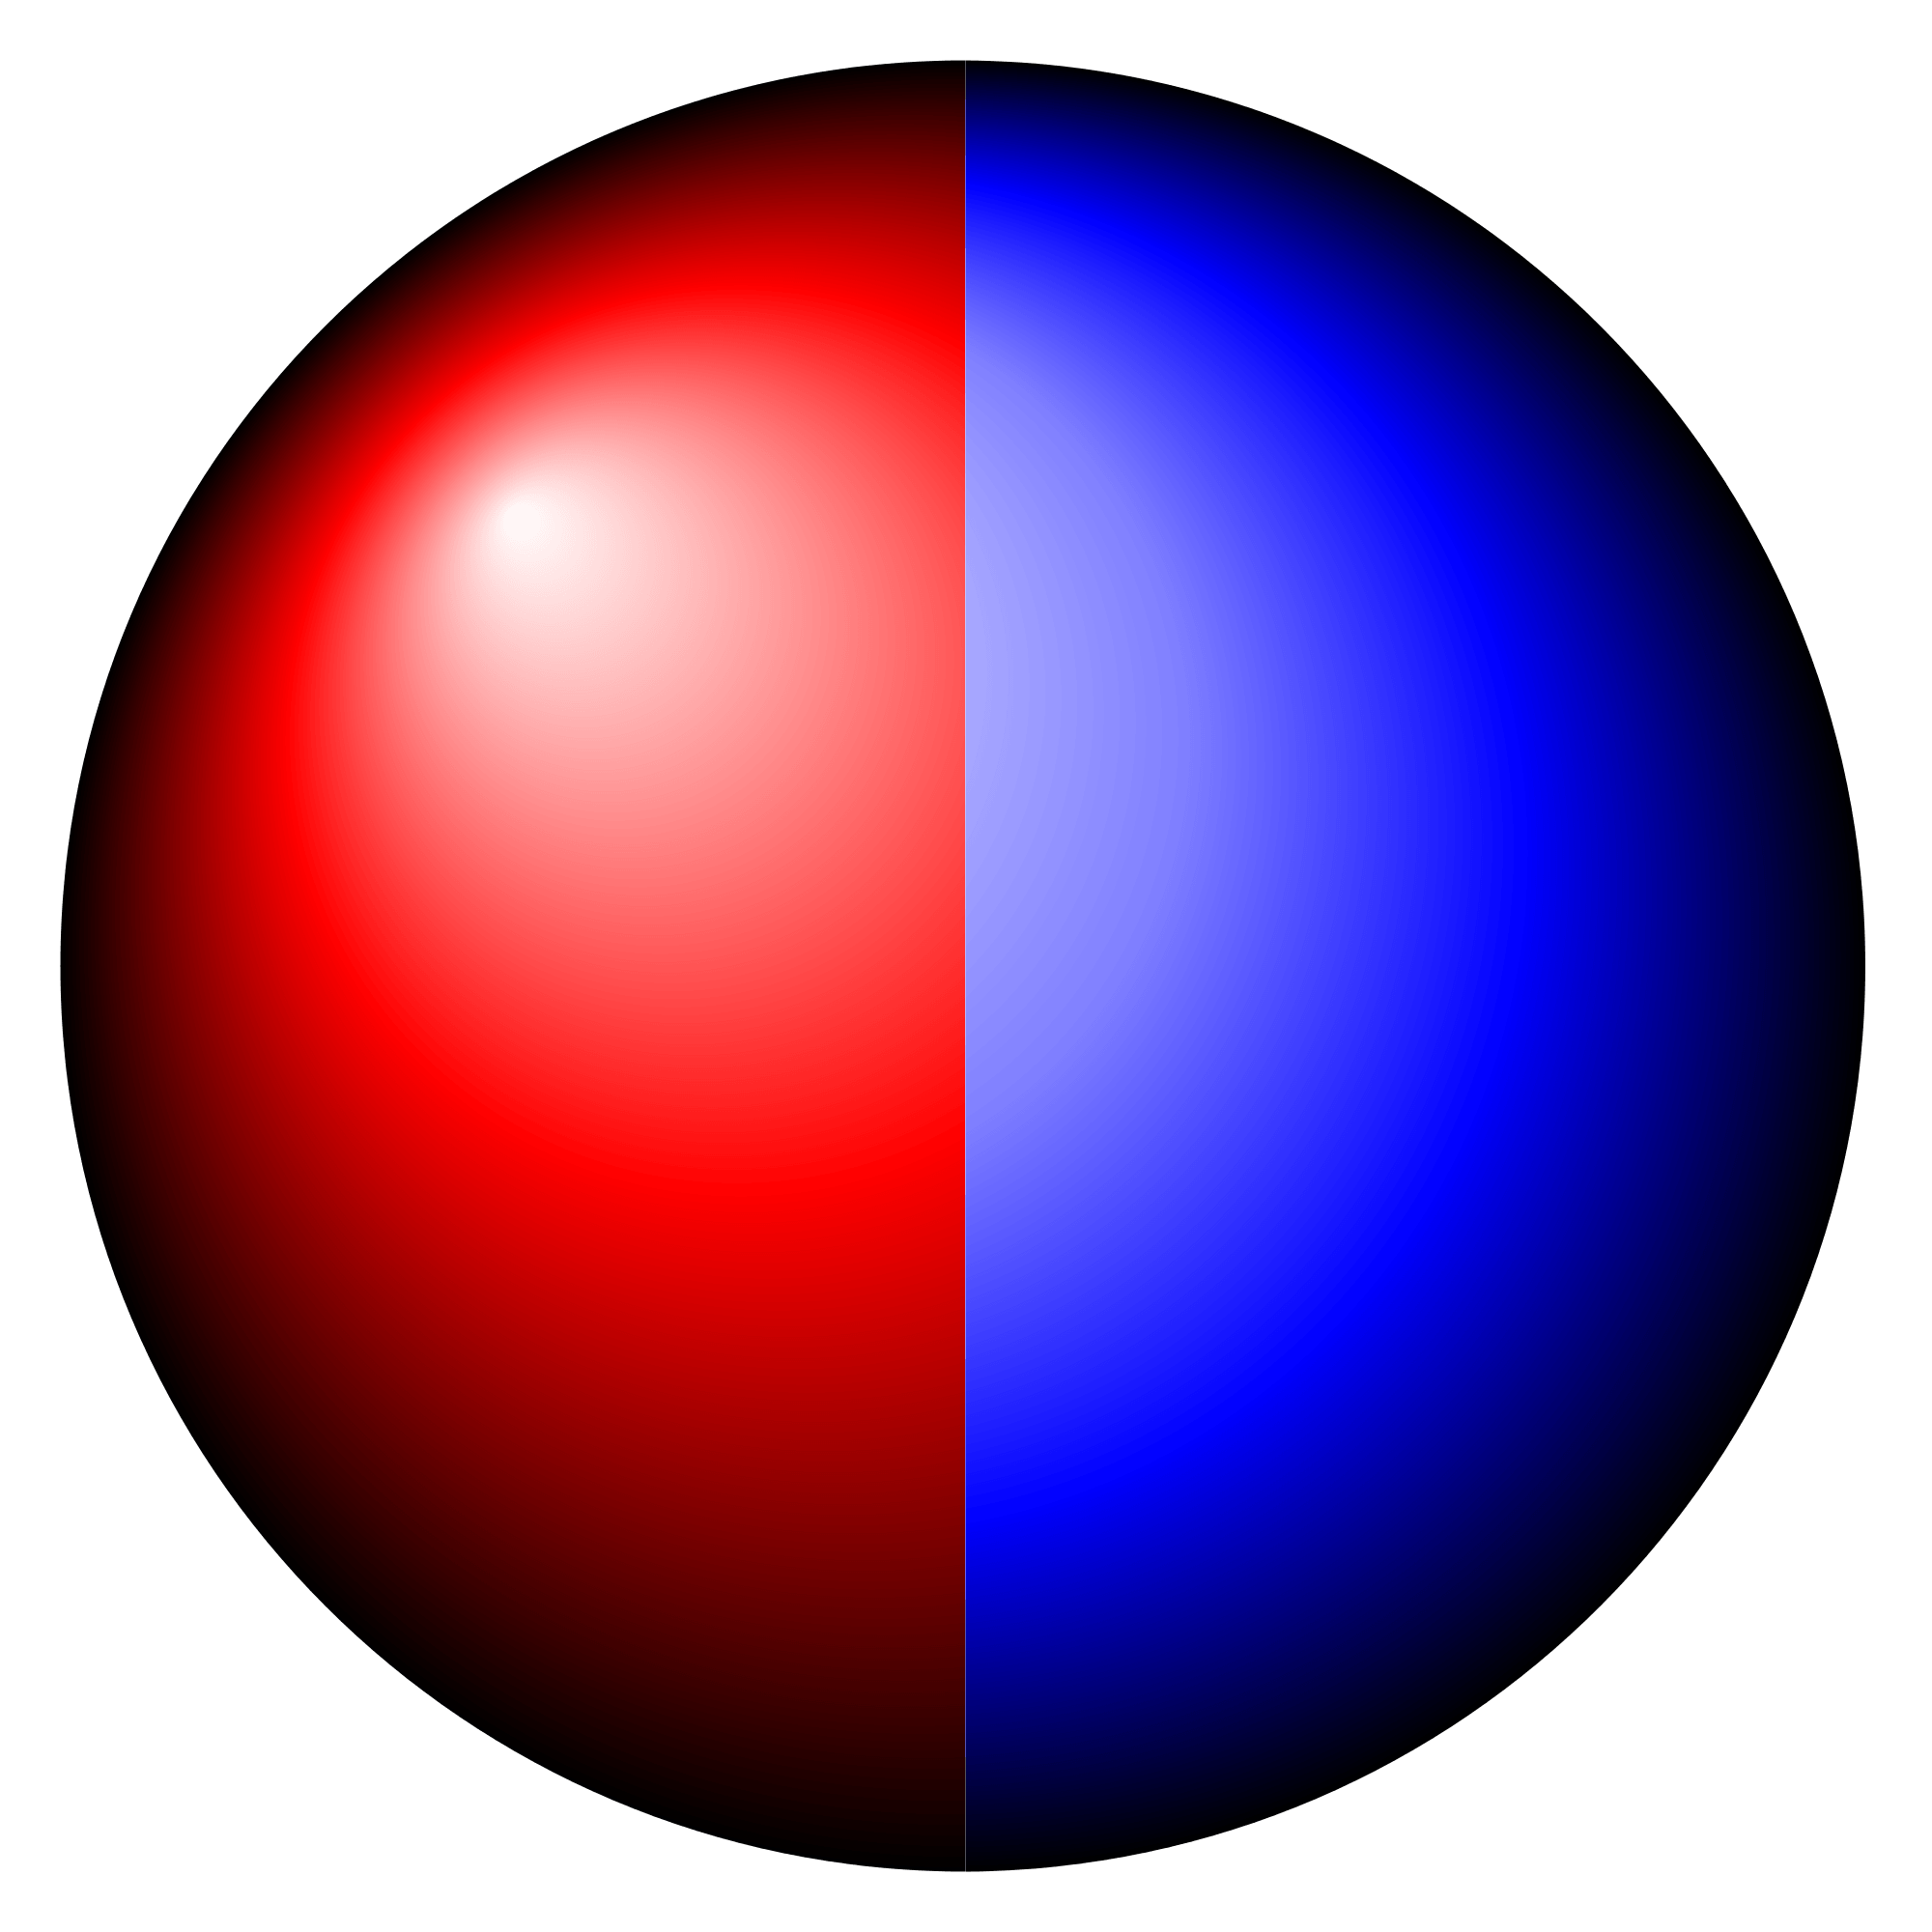 Blue and Red Dot Logo - File:Red-blue dot.svg - Wikimedia Commons